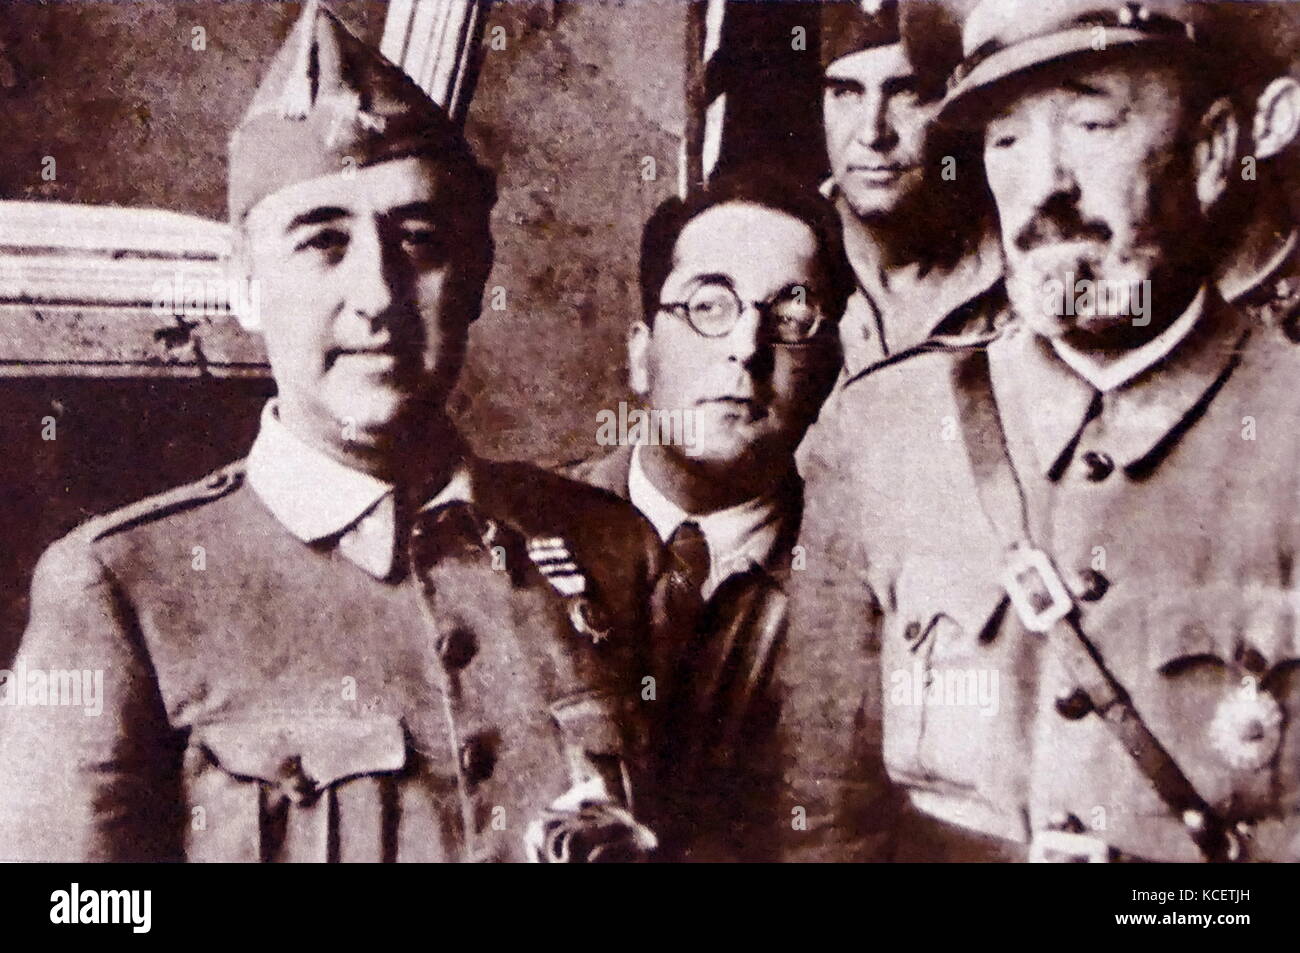 Spanish Civil War Generals: Nationalist generals (left to right), Moscardo, and Franco at the relief of the siege of Toledo 1937. José Moscardó e Ituarte, was the military Governor of Toledo Province during the Spanish Civil War. Stock Photo